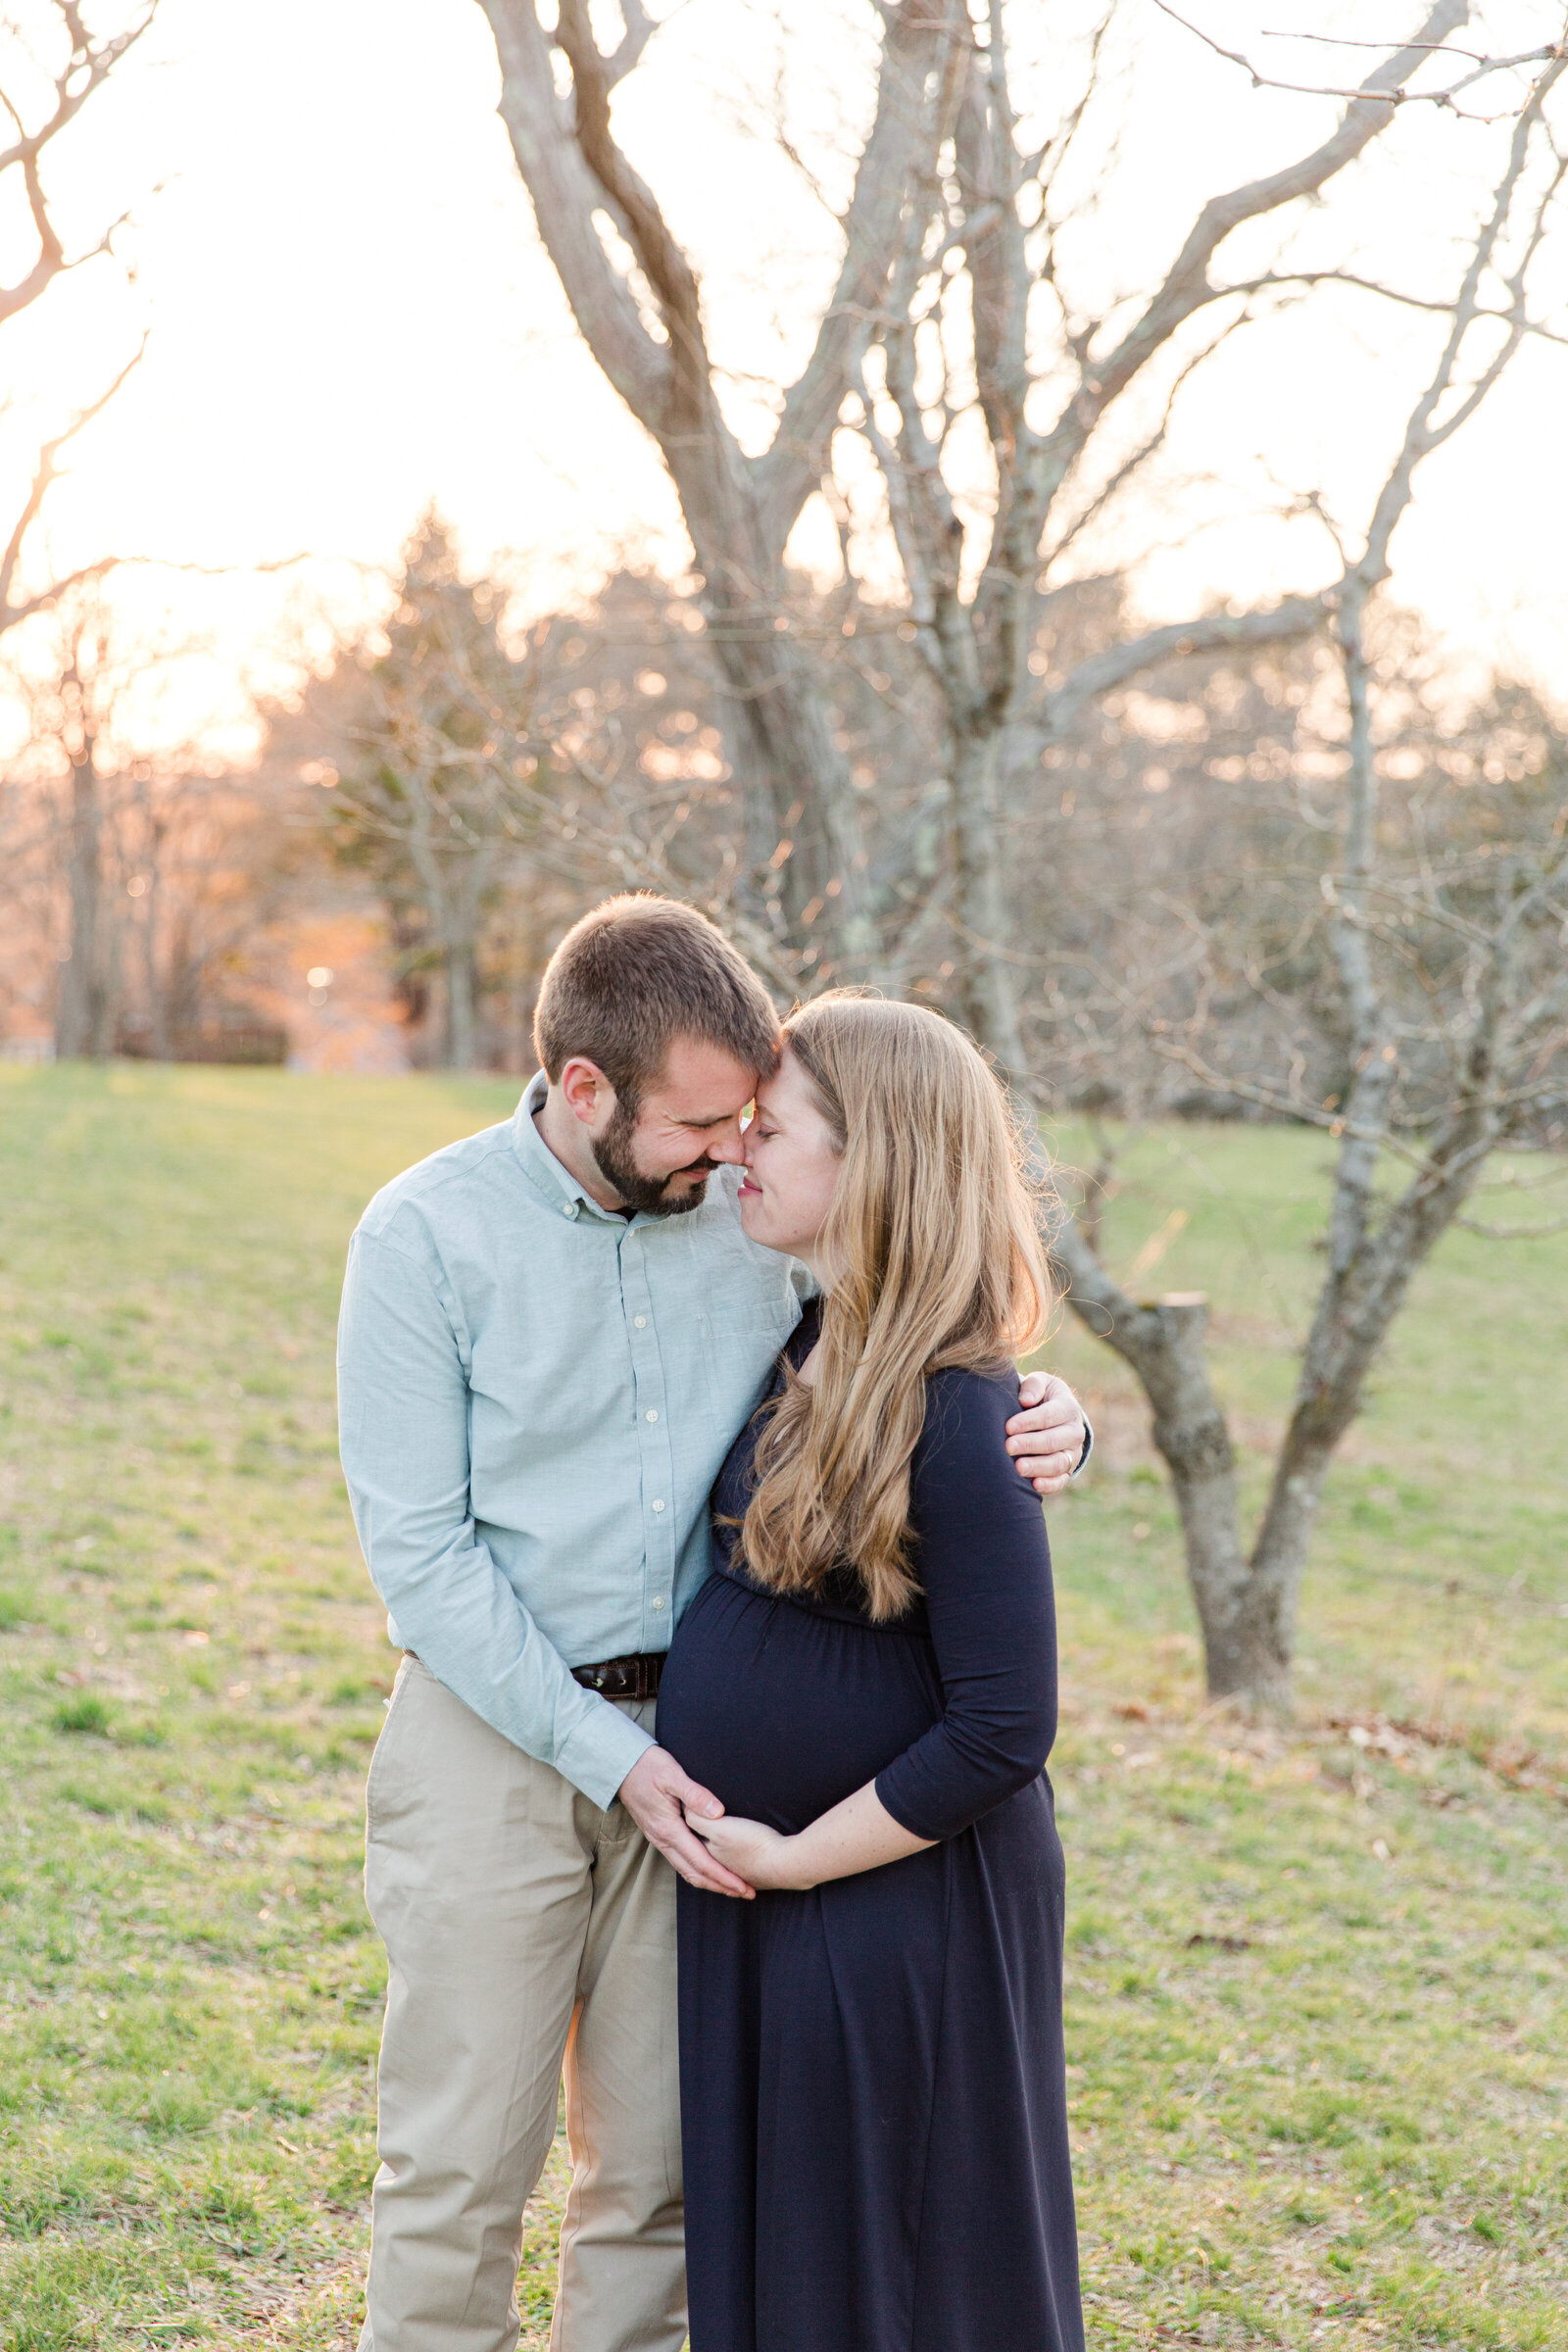 Maternity Session in the spring at Arnold Arboretum, Boston MA